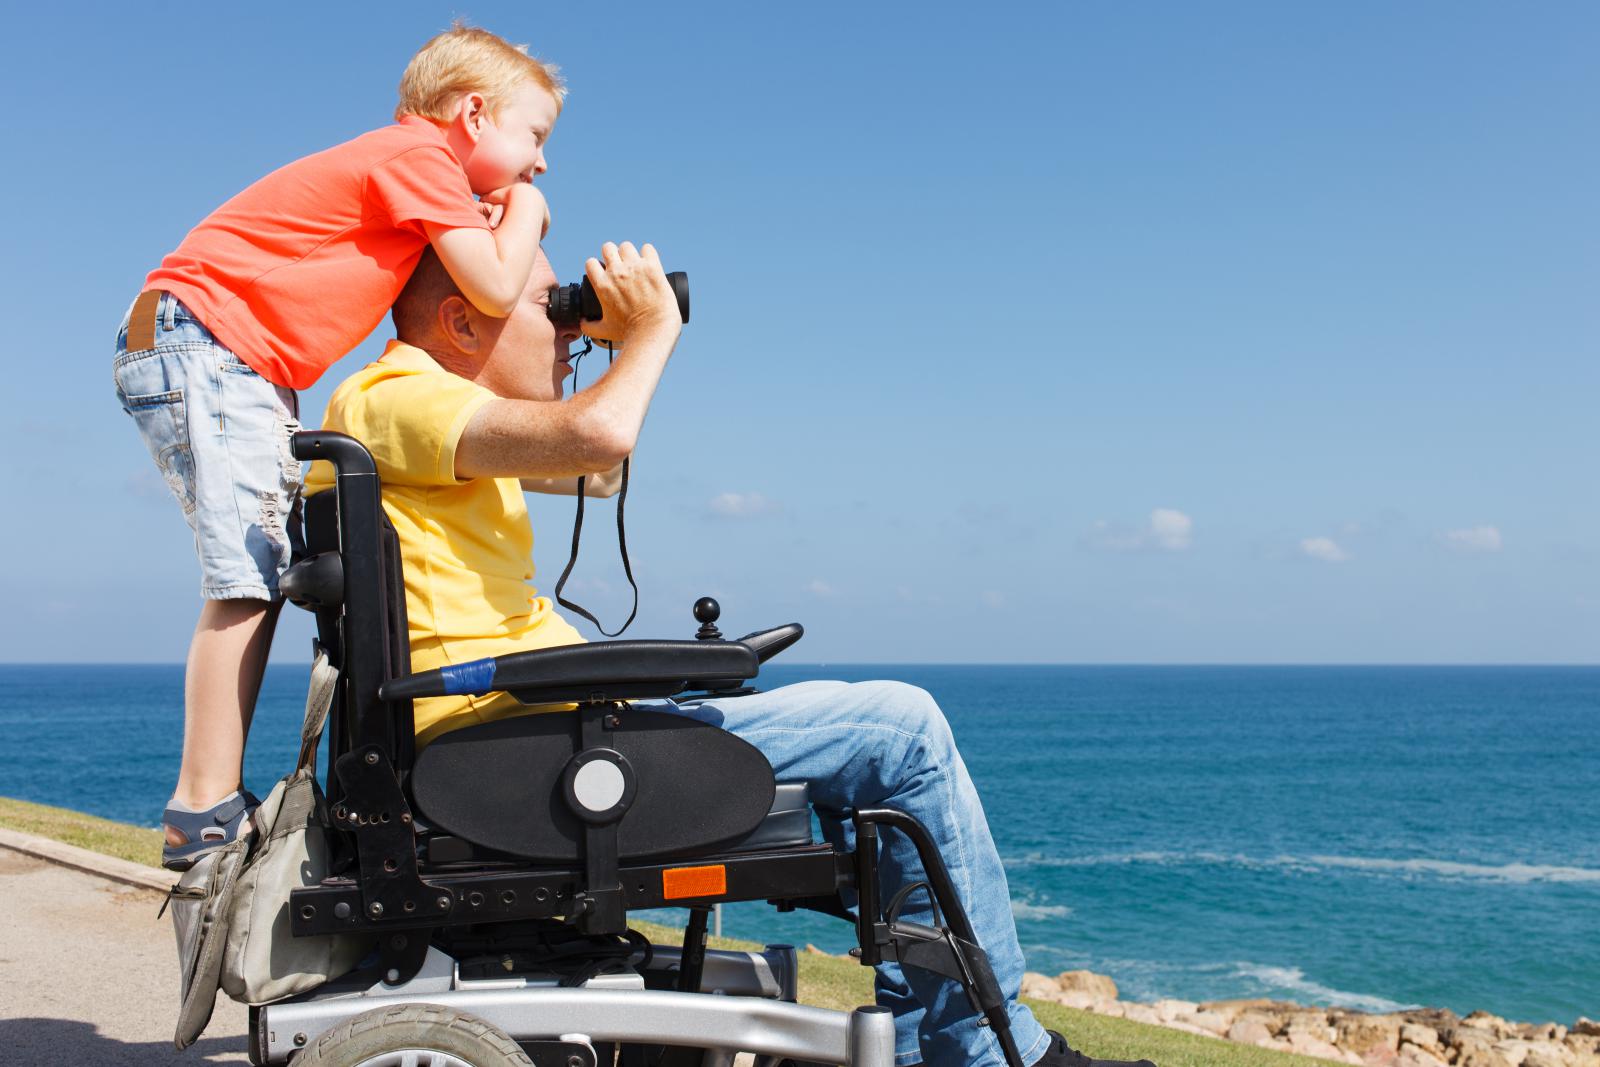 this is an image of man in his power wheelchair alongside ocean looking through binoculars with his son on his back